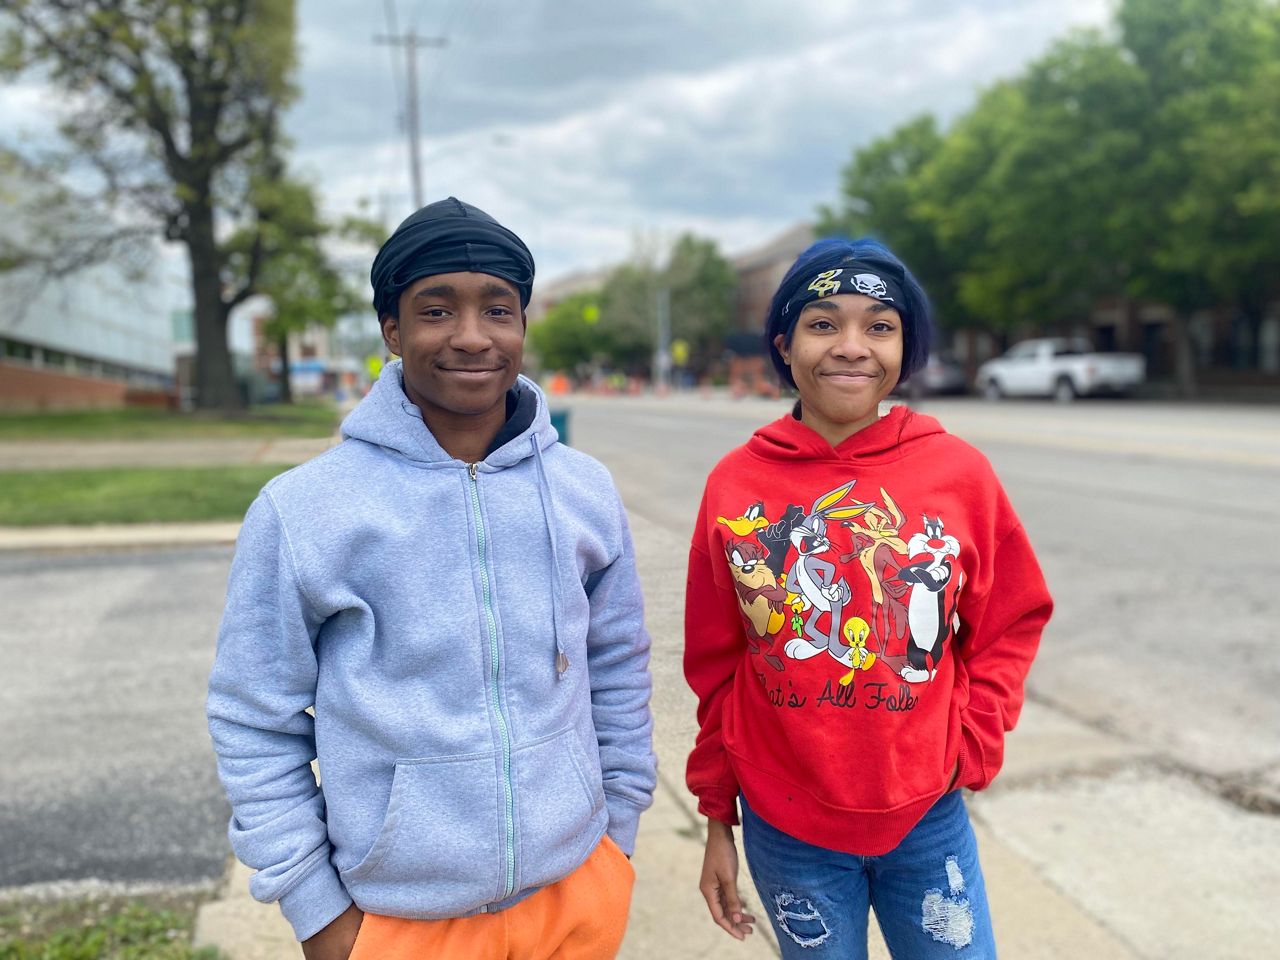 West End residents Mykell Henderson and Alesecia Palmore believe the speed cushions are going to be good for the safety of their community. (Spectrum News 1/Casey Weldon)